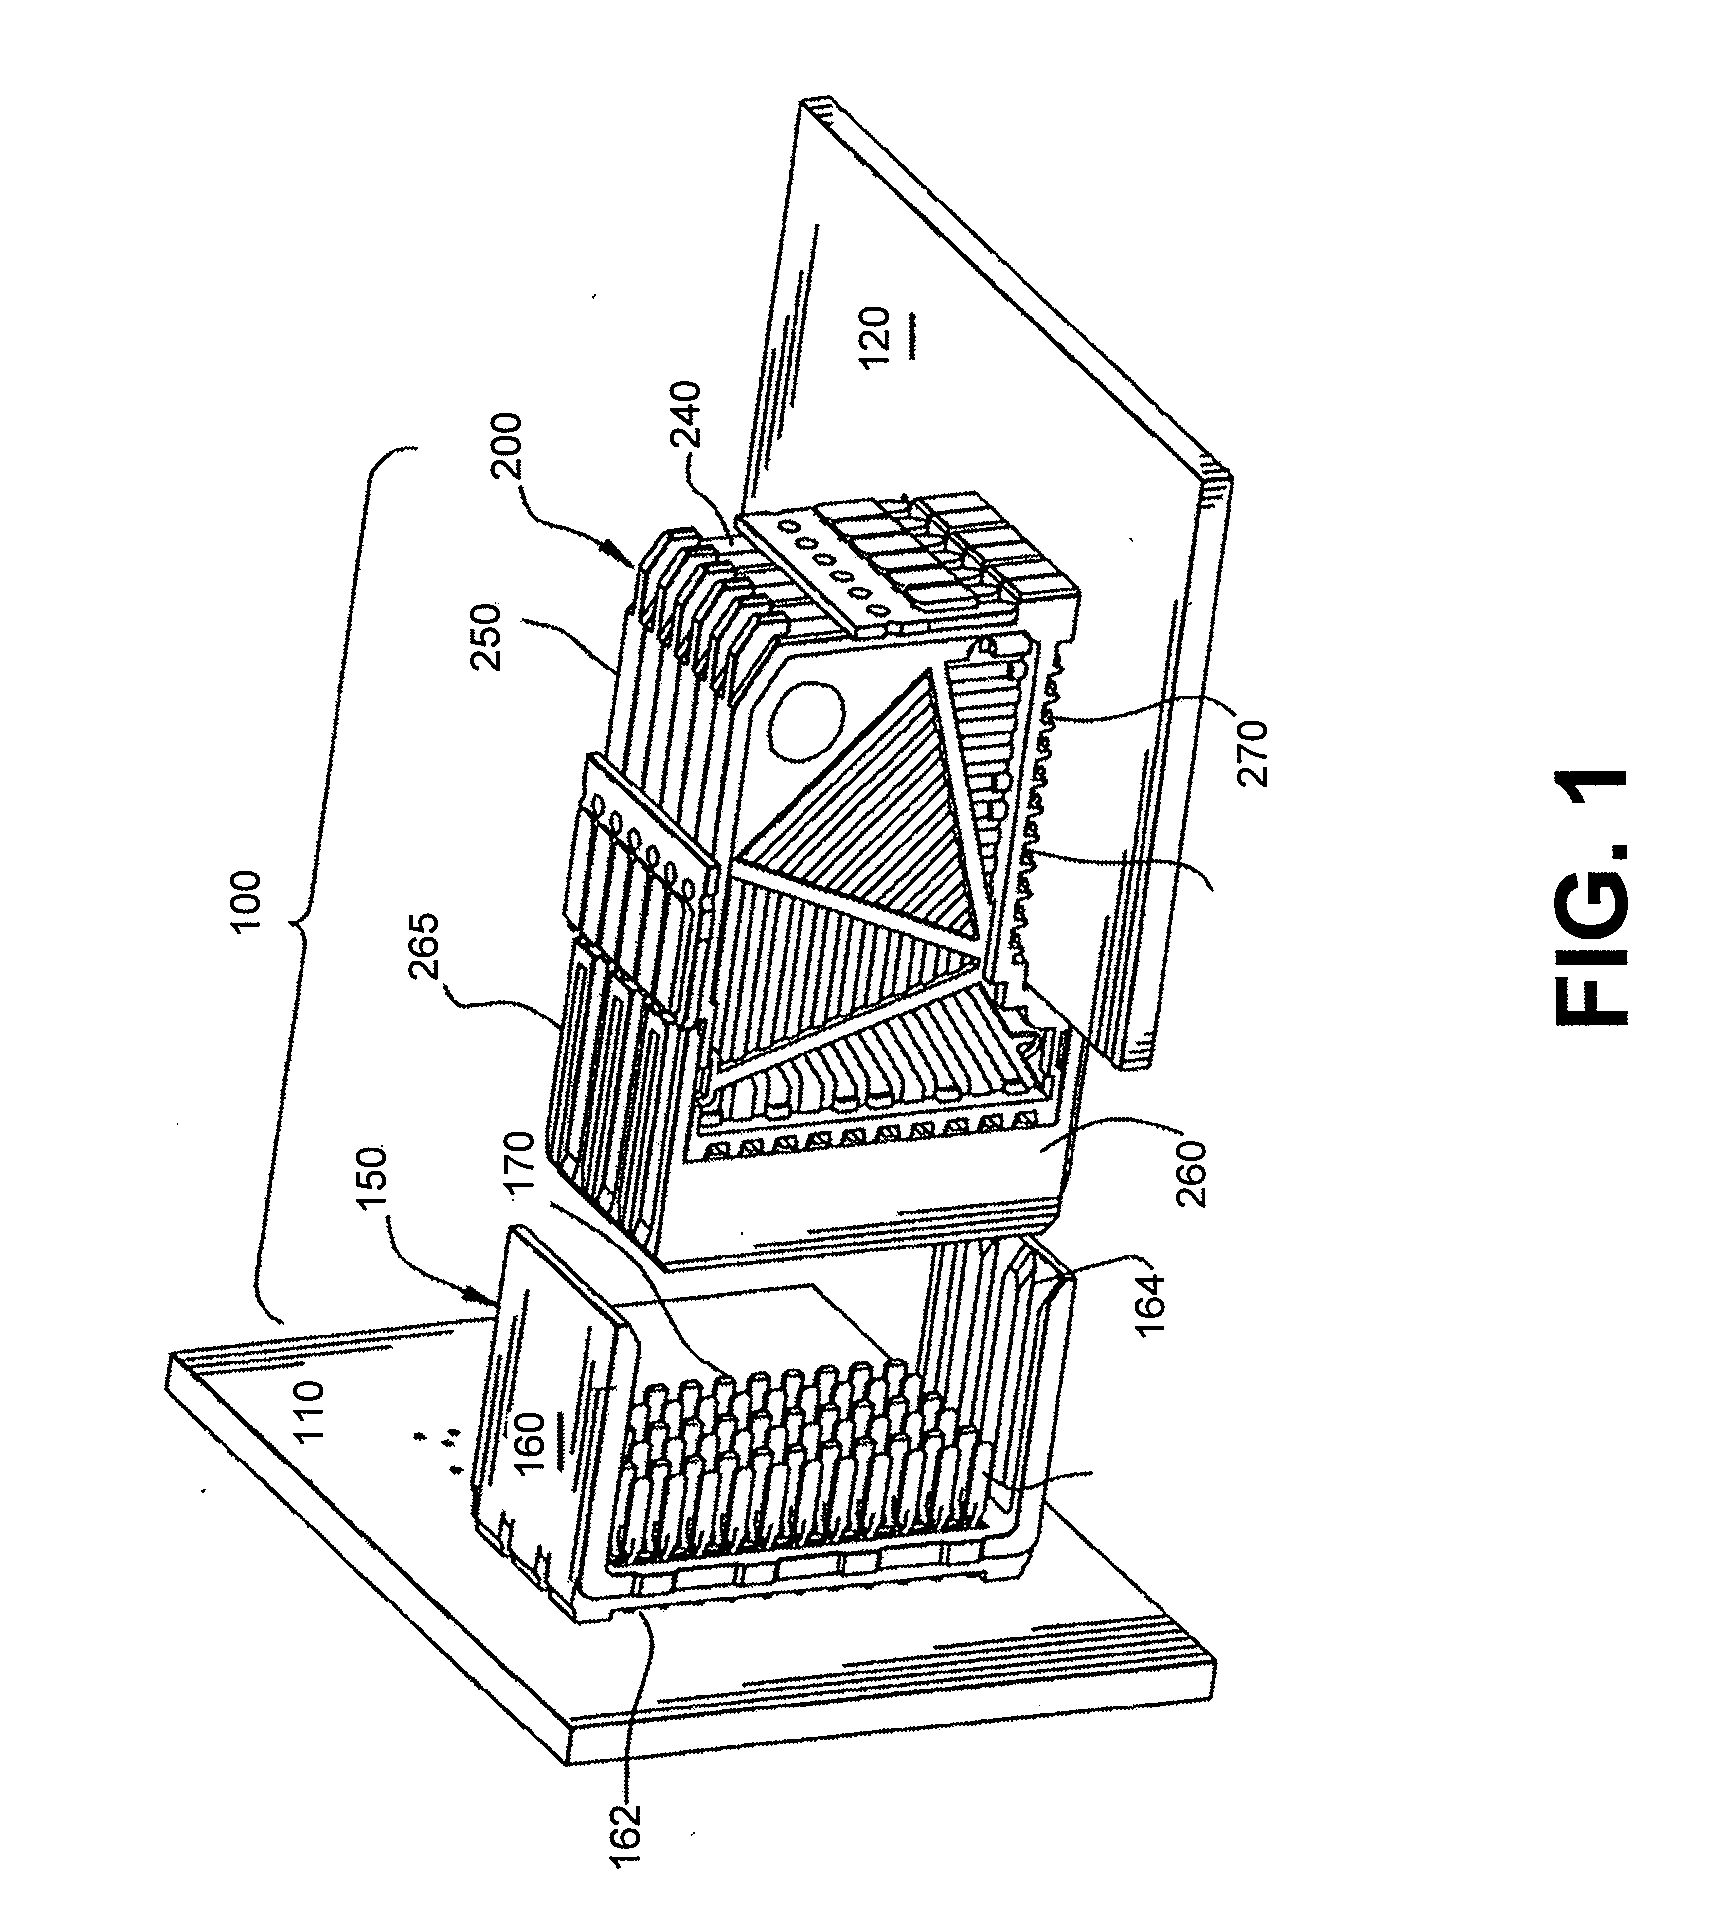 High frequency broadside-coupled electrical connector